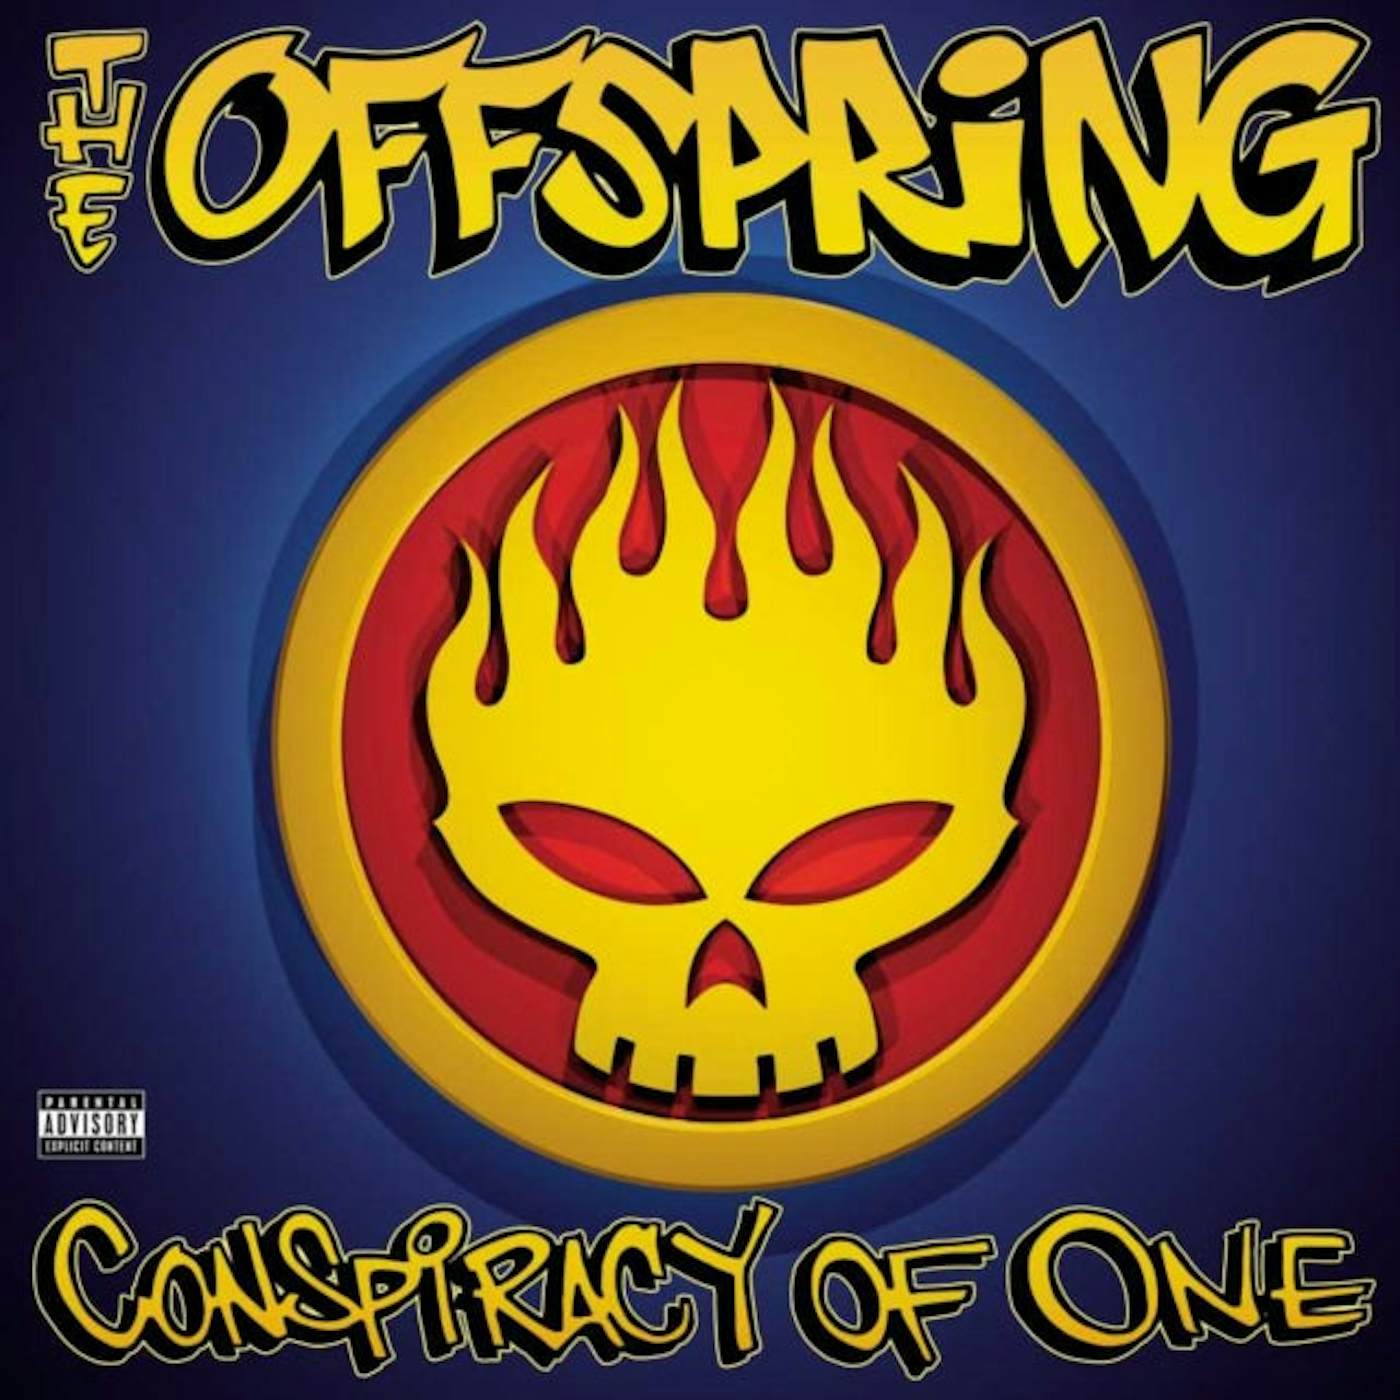 The Offspring LP Vinyl Record - Conspiracy Of One